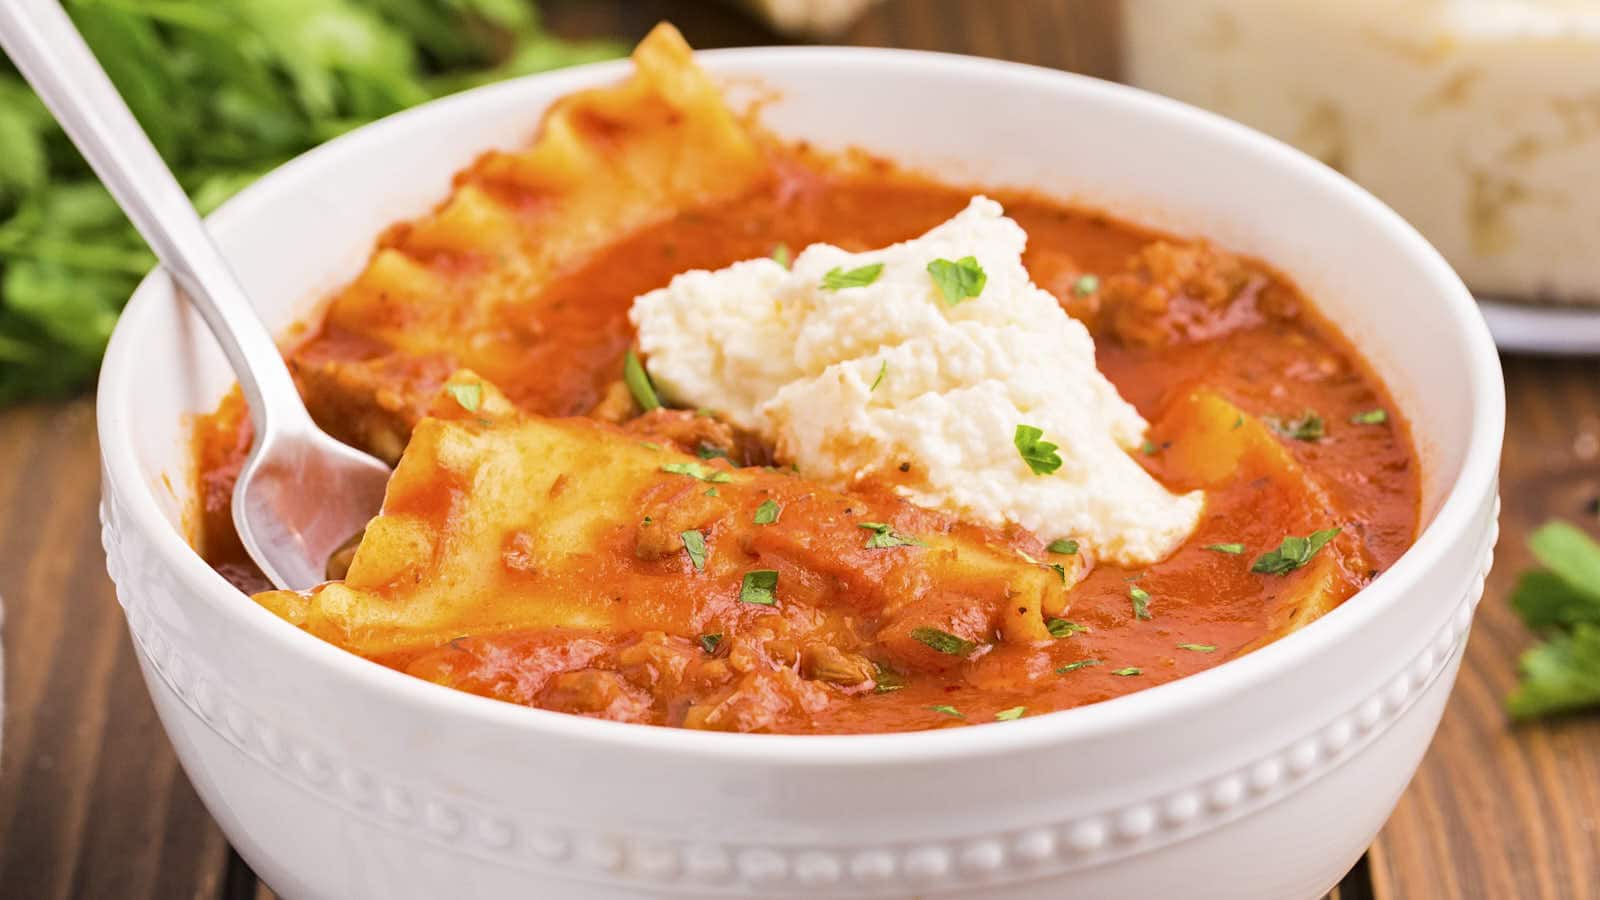 Lasagna Soup recipe by Cheerful Cook.